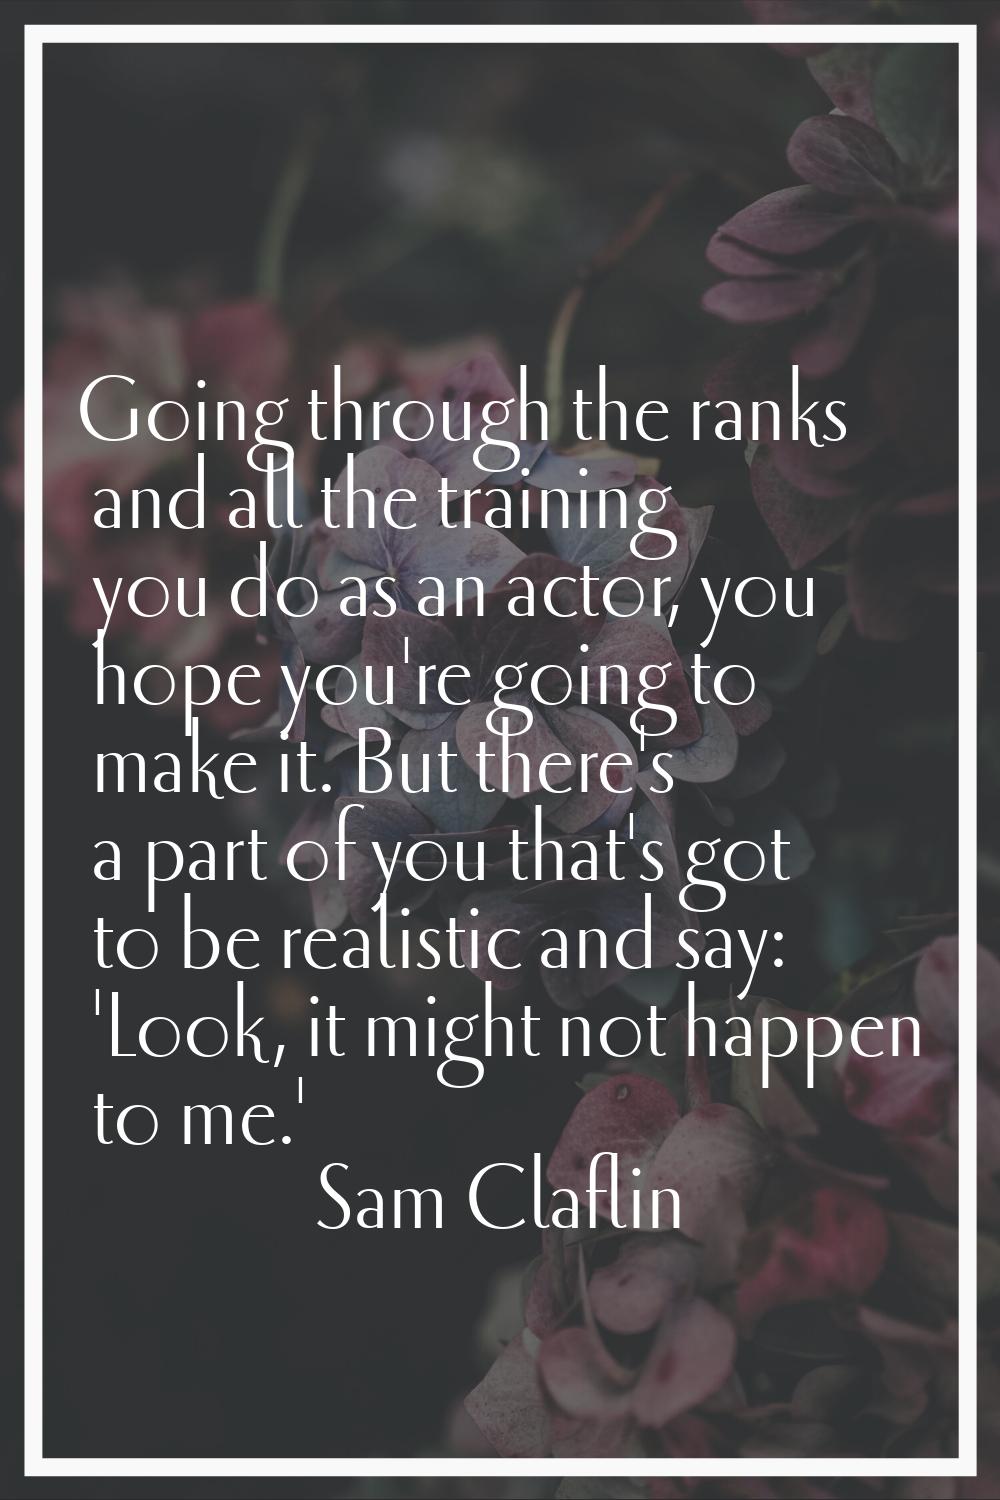 Going through the ranks and all the training you do as an actor, you hope you're going to make it. 